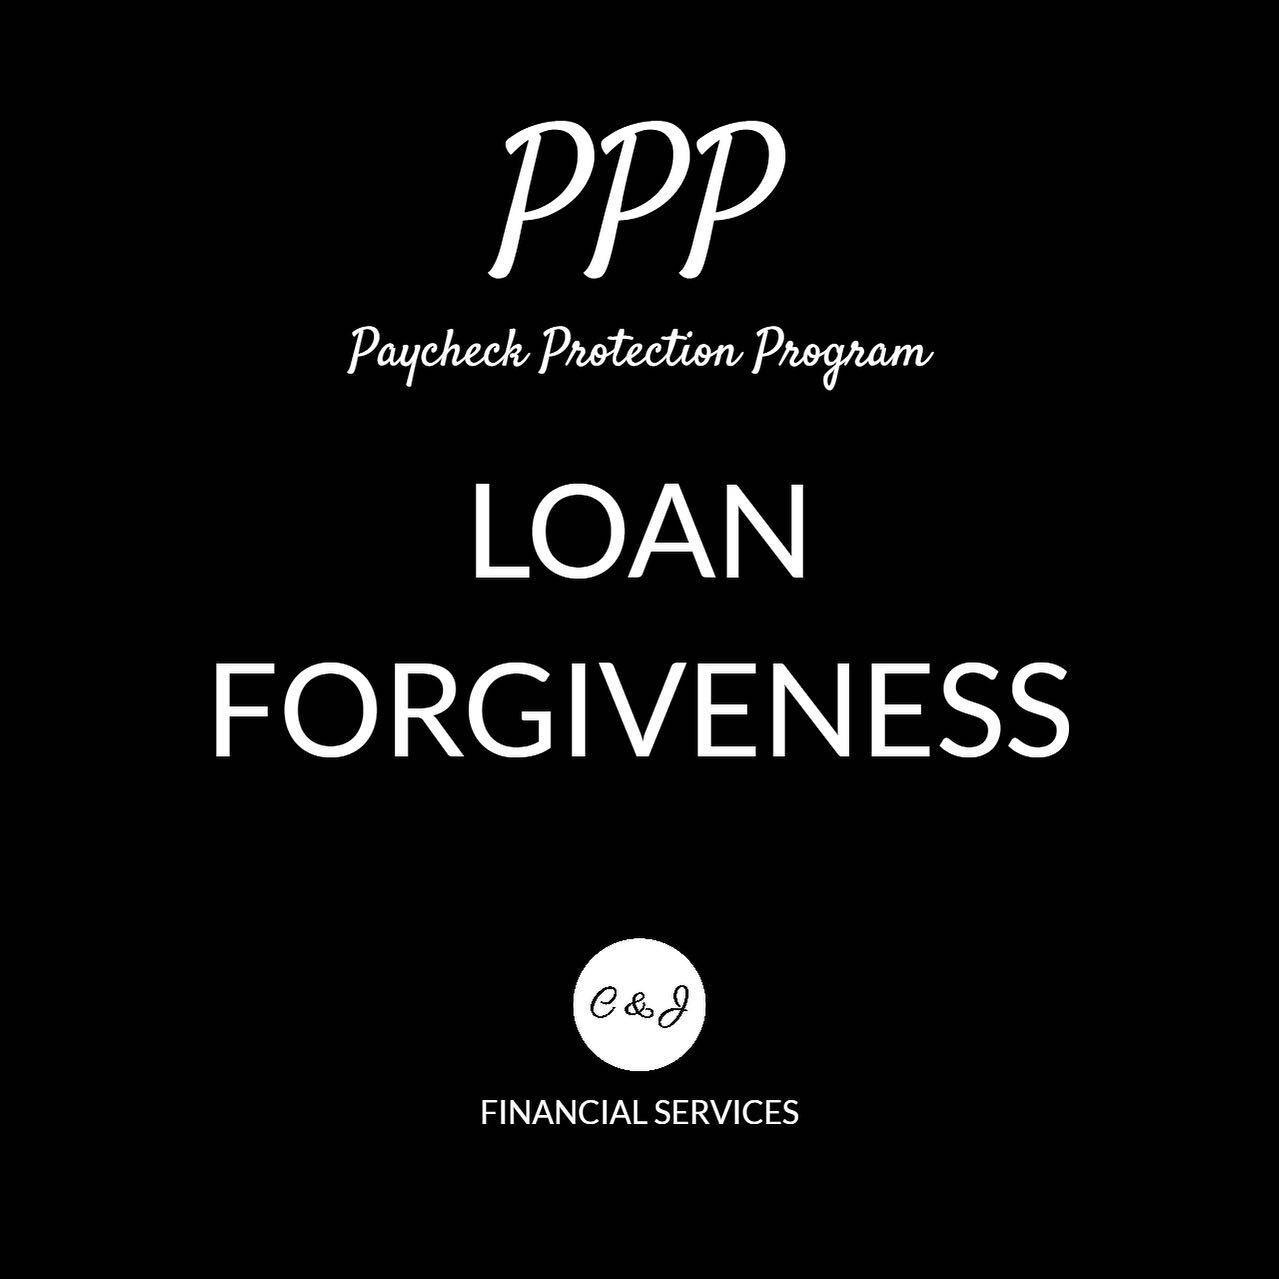 Recently some provisions were made to the PPP Loan Program that might benefit you:
﻿
﻿1. SBA will now allow borrowers with loans less than $150k to use a simple one-page forgiveness application form (rather than the complex/detailed form it once requ